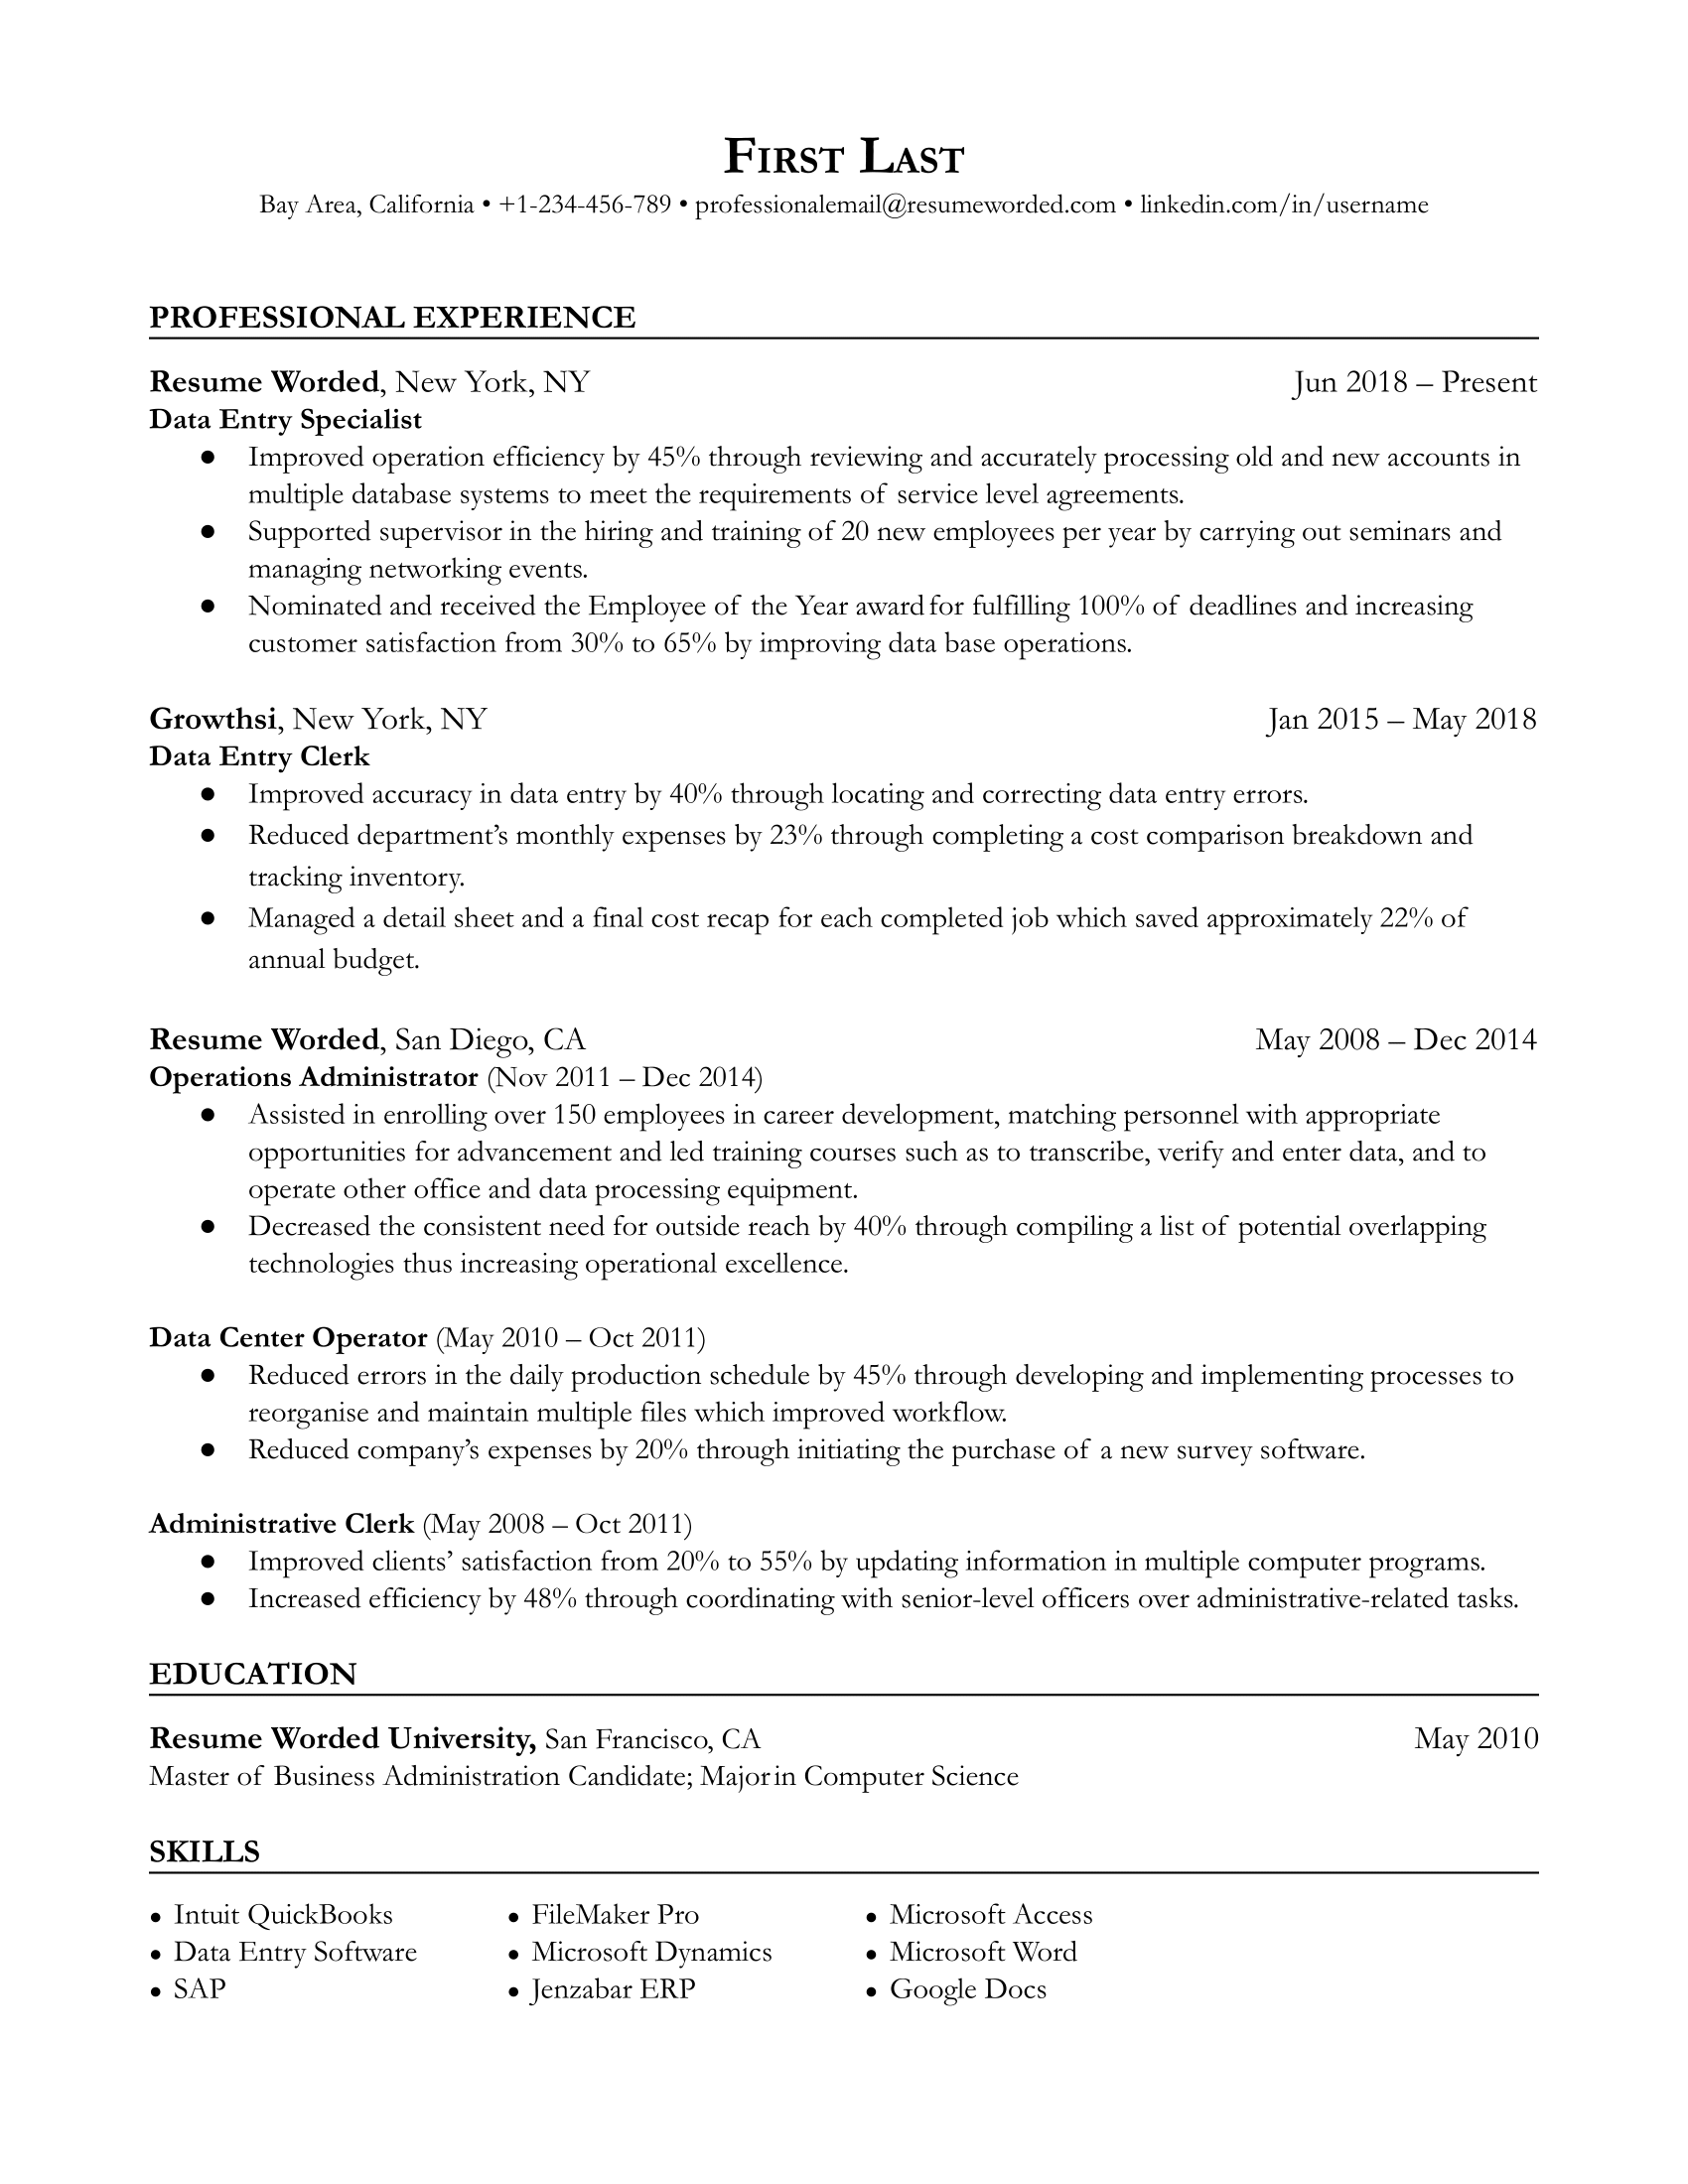 Data Entry Specialist Resume Template + Example